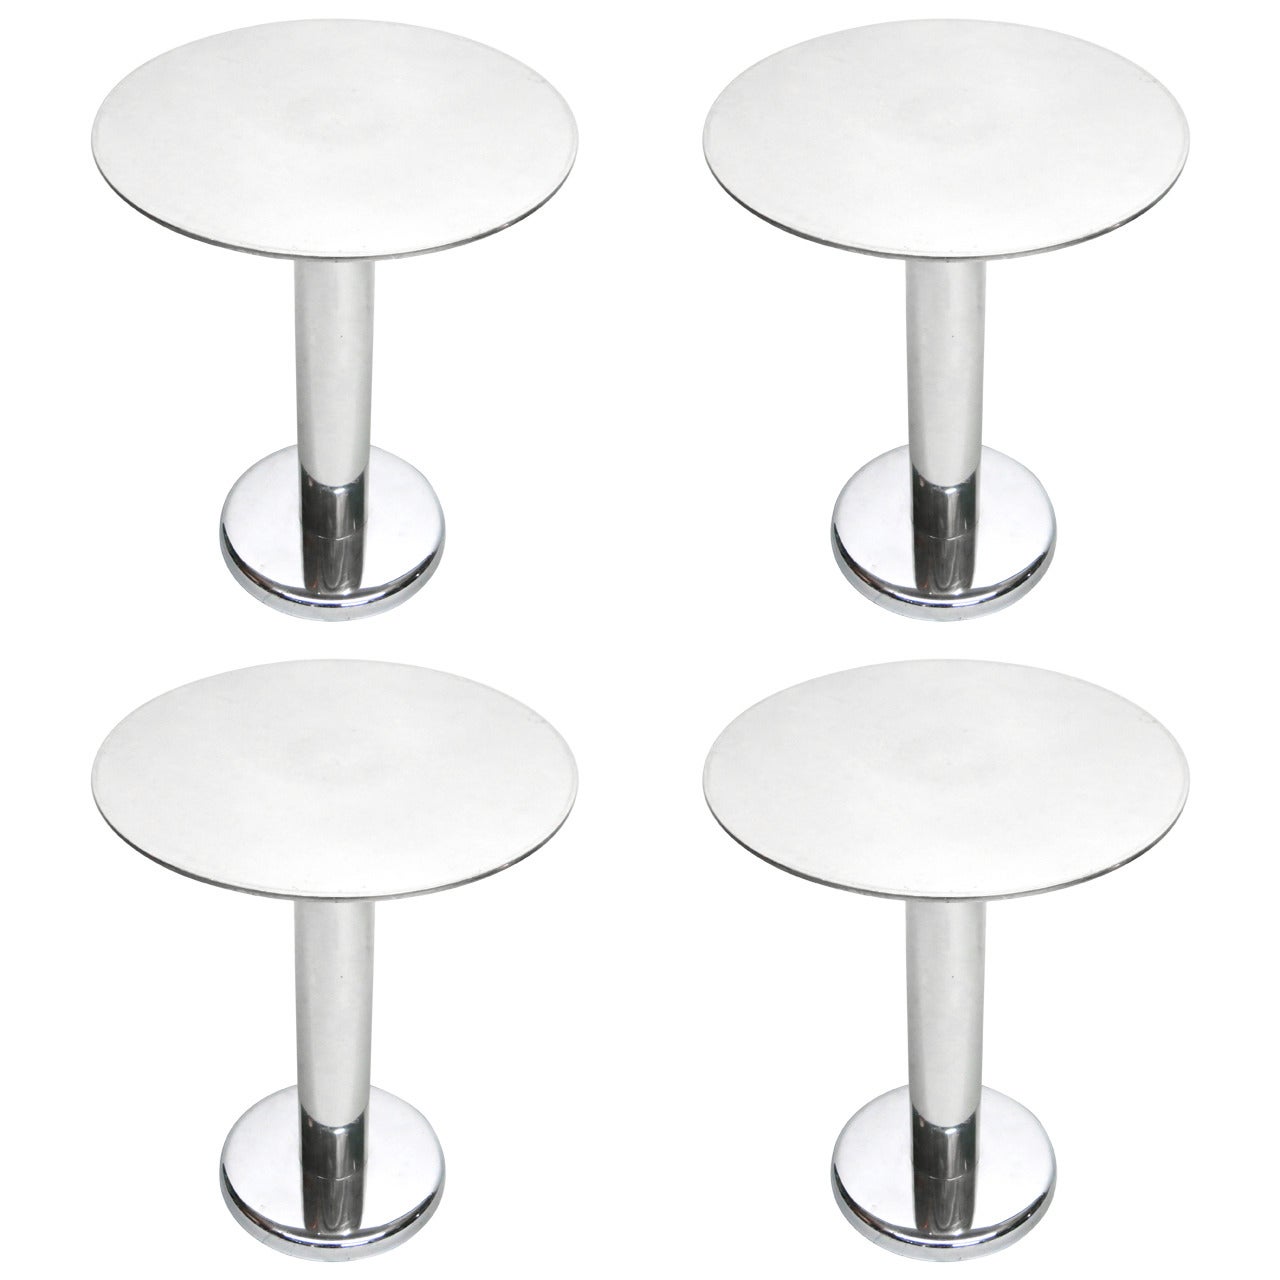 Four Round Side Tables in Polished Steel Made in USA, circa 1980